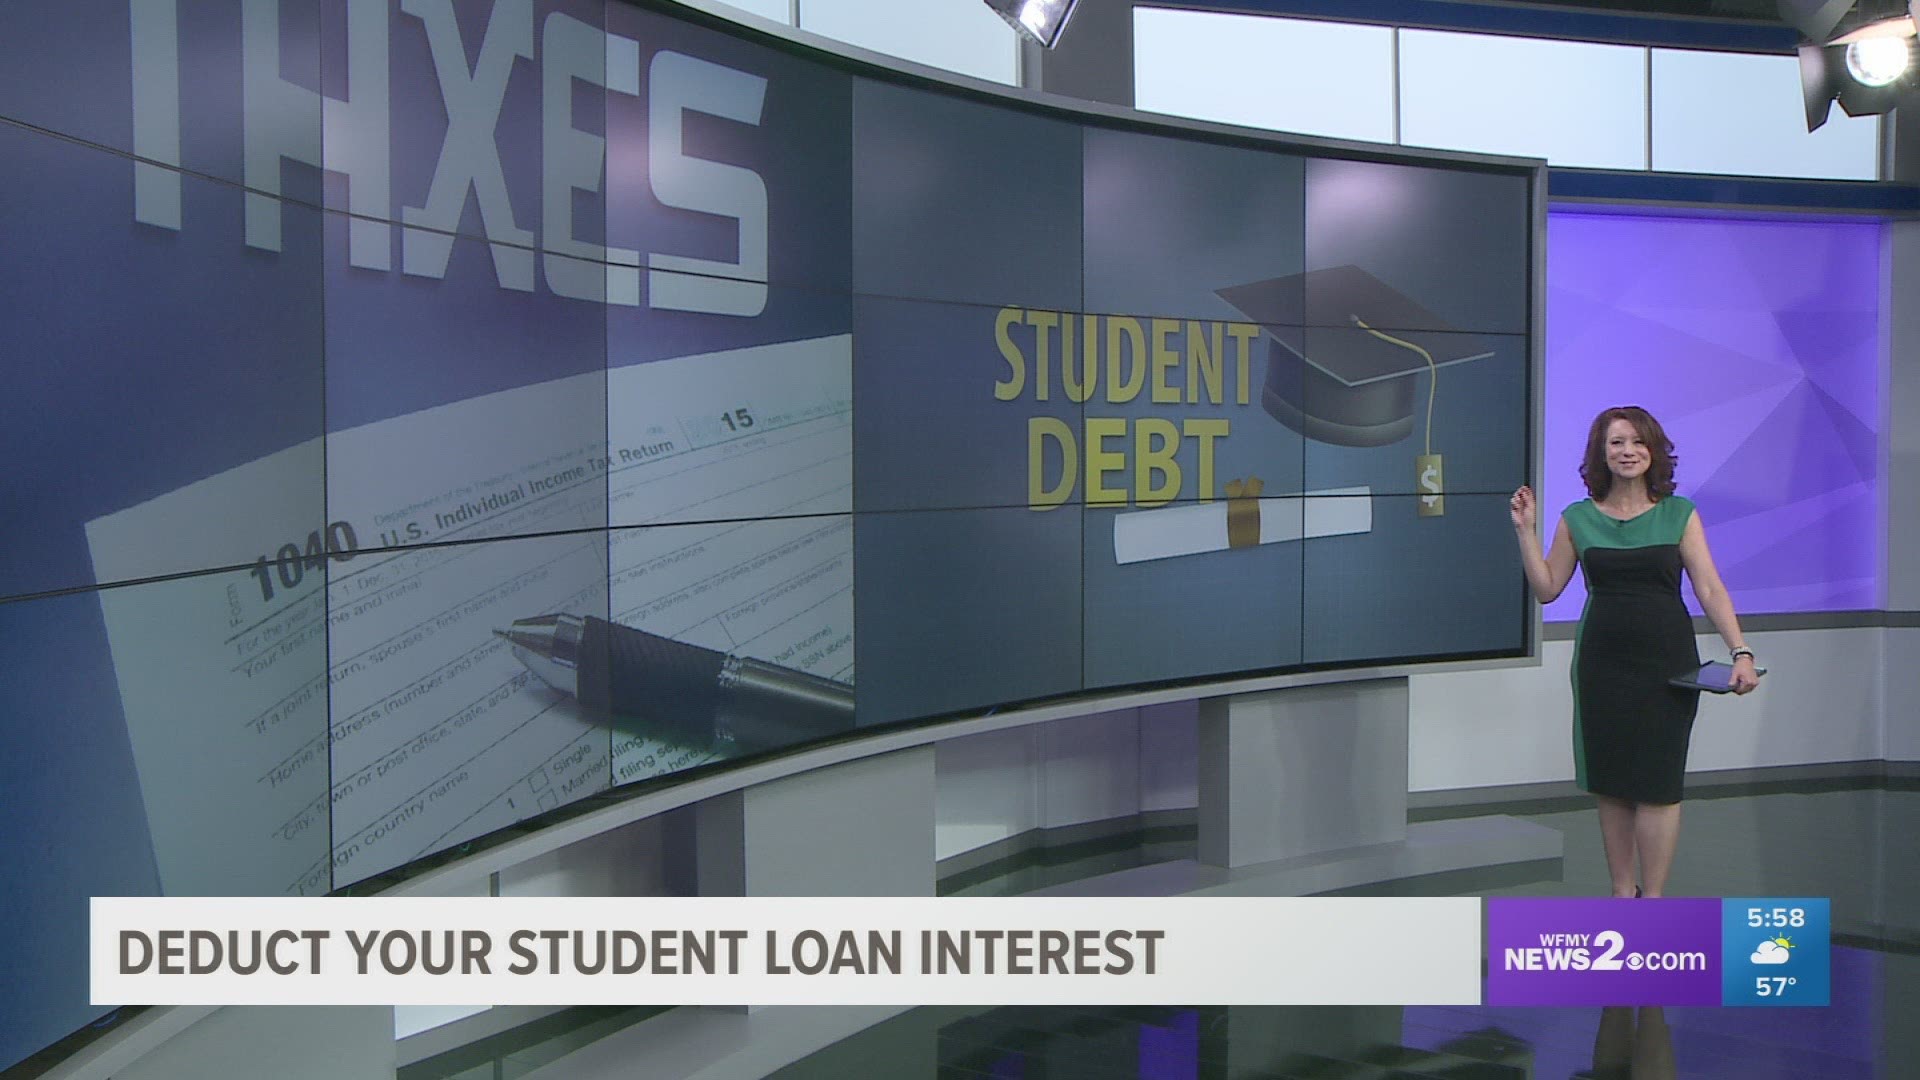 If you're one of the 48 million Americans repaying loans from school, expect a little bit of relief come tax time.